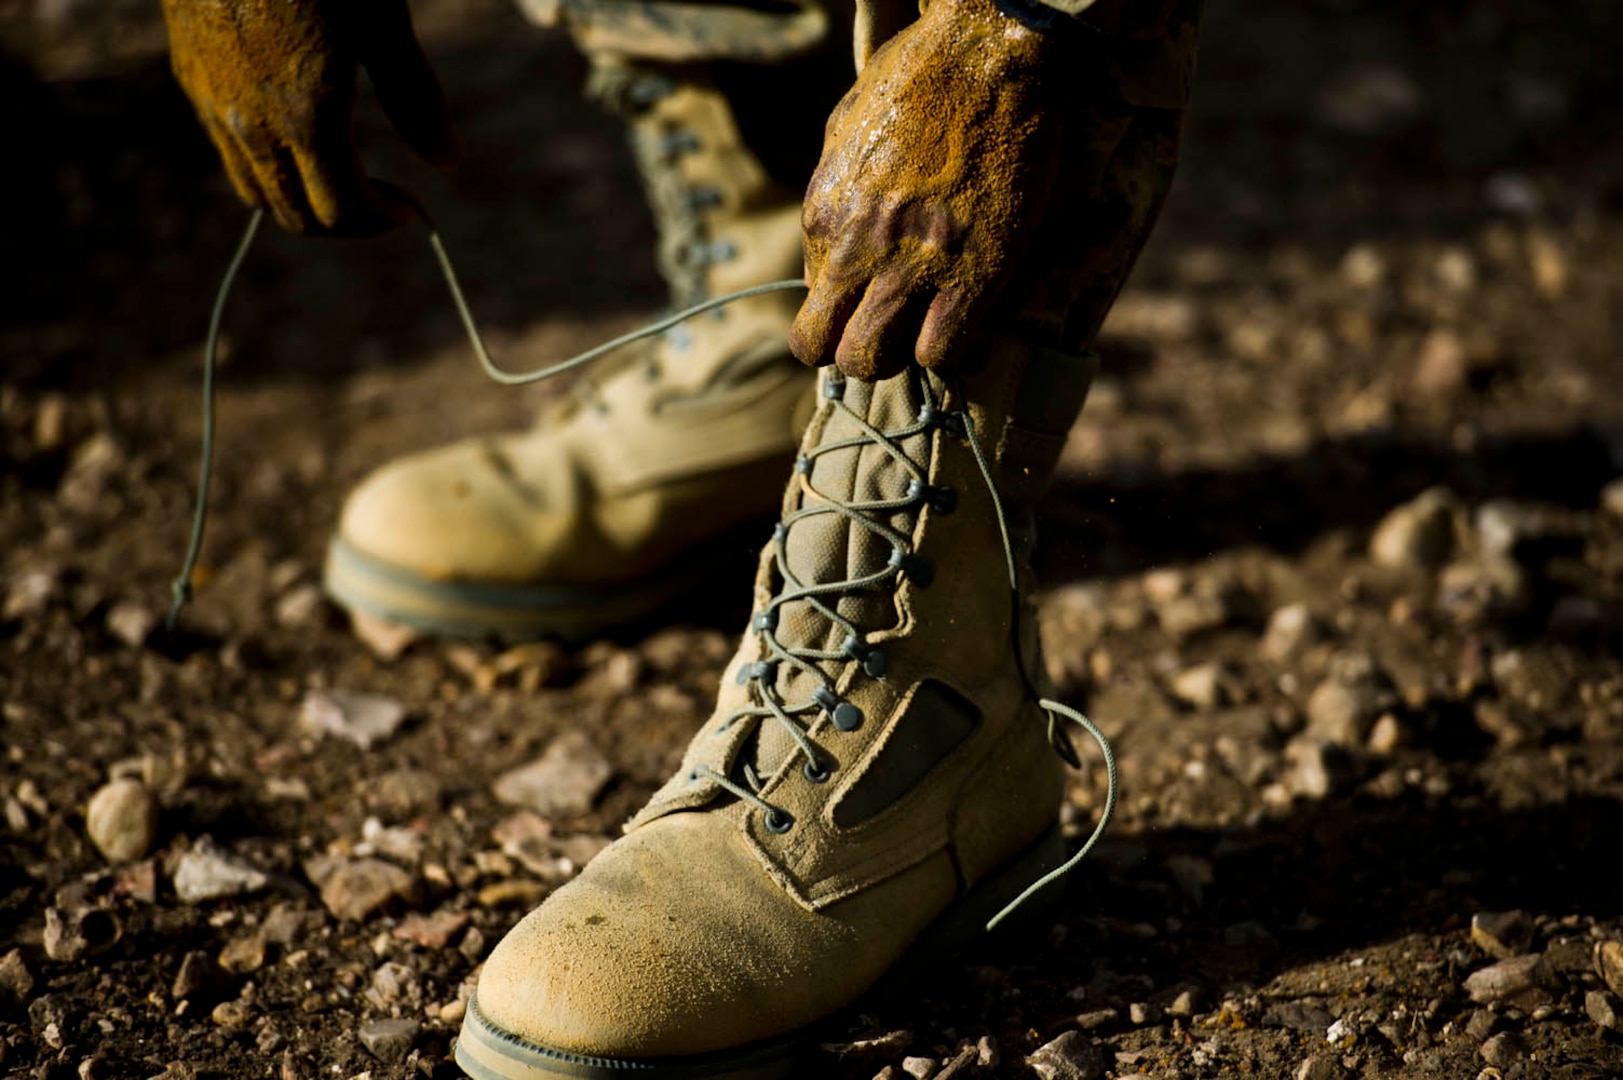 An Air Force basic military trainee reties his boots after completing the uphill low-crawl obstacle, part of the Creating Leaders, Airmen and Warriors (CLAW) course, July 27 at Lackland Air Force Base.  CLAW is a three-hour mission-oriented exercise designed to test teamwork, leadership skills and the ability to perform under pressure. (U.S. Air Force photo/Senior Airman Marleah Miller)